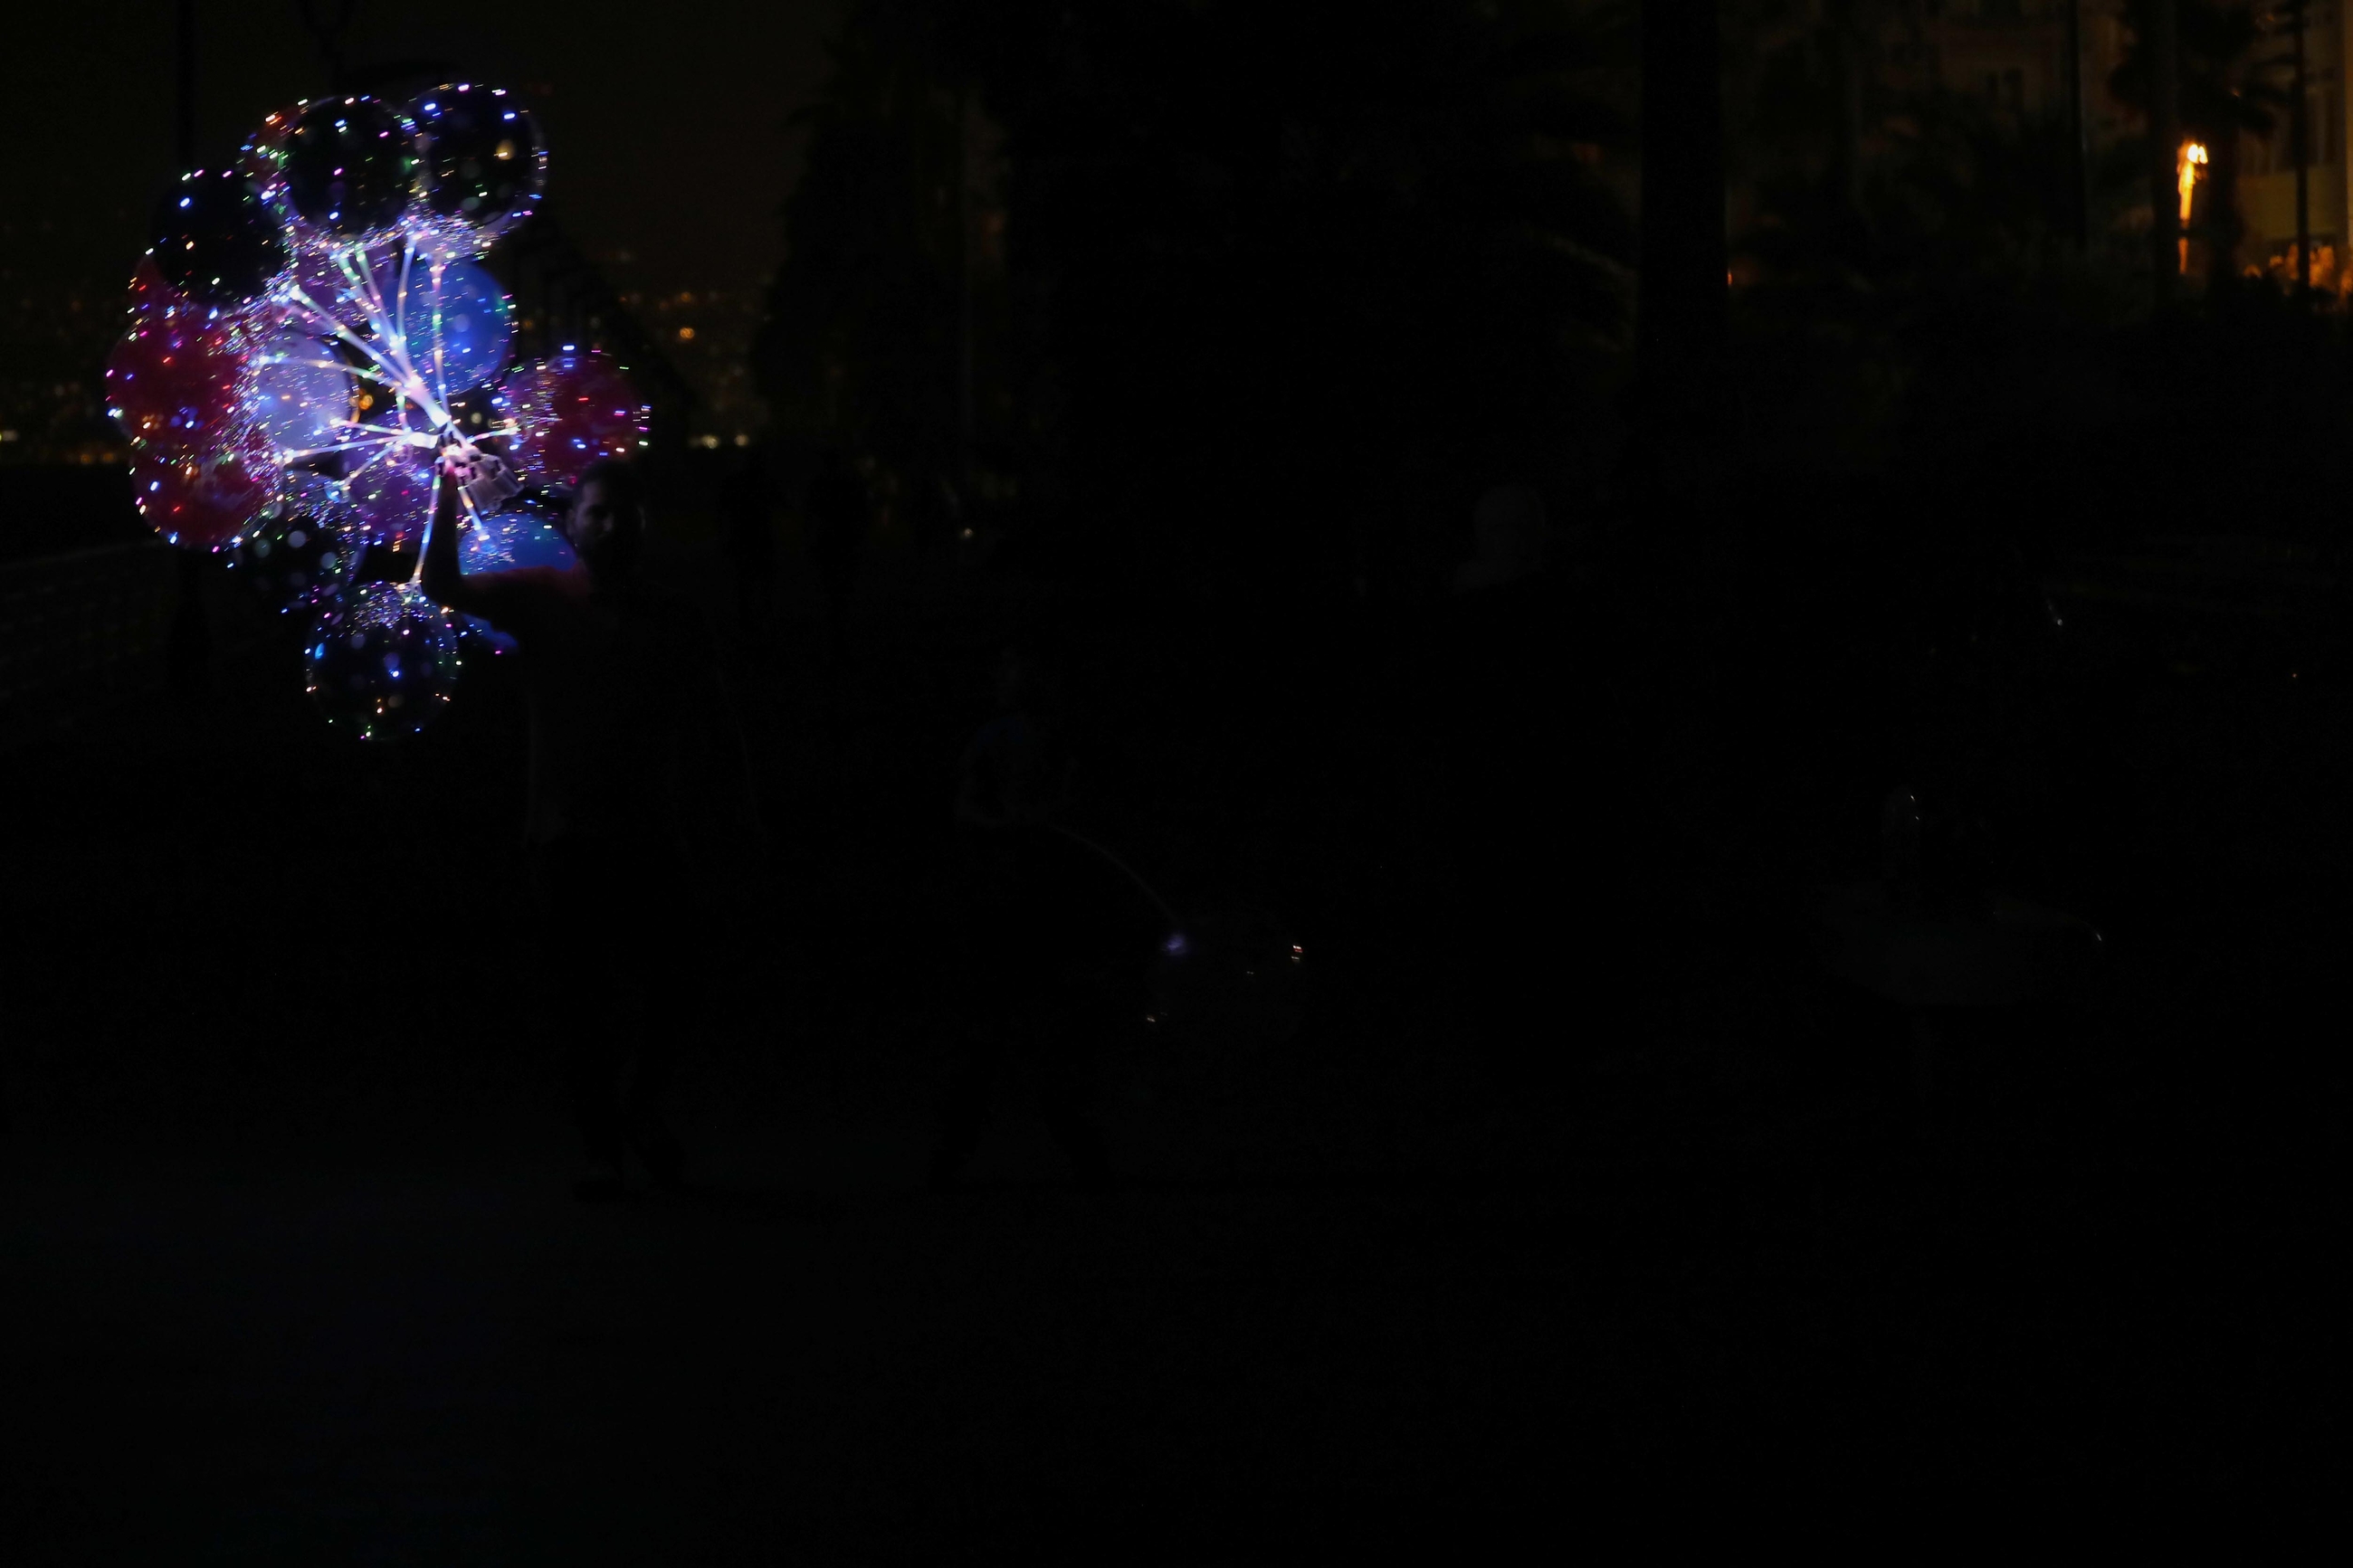 Beirut in darkness; glow-in-the-dark balloons. Beirut, Lebanon. August 28, 2020. (Marwan Tahtah/The Public Source)